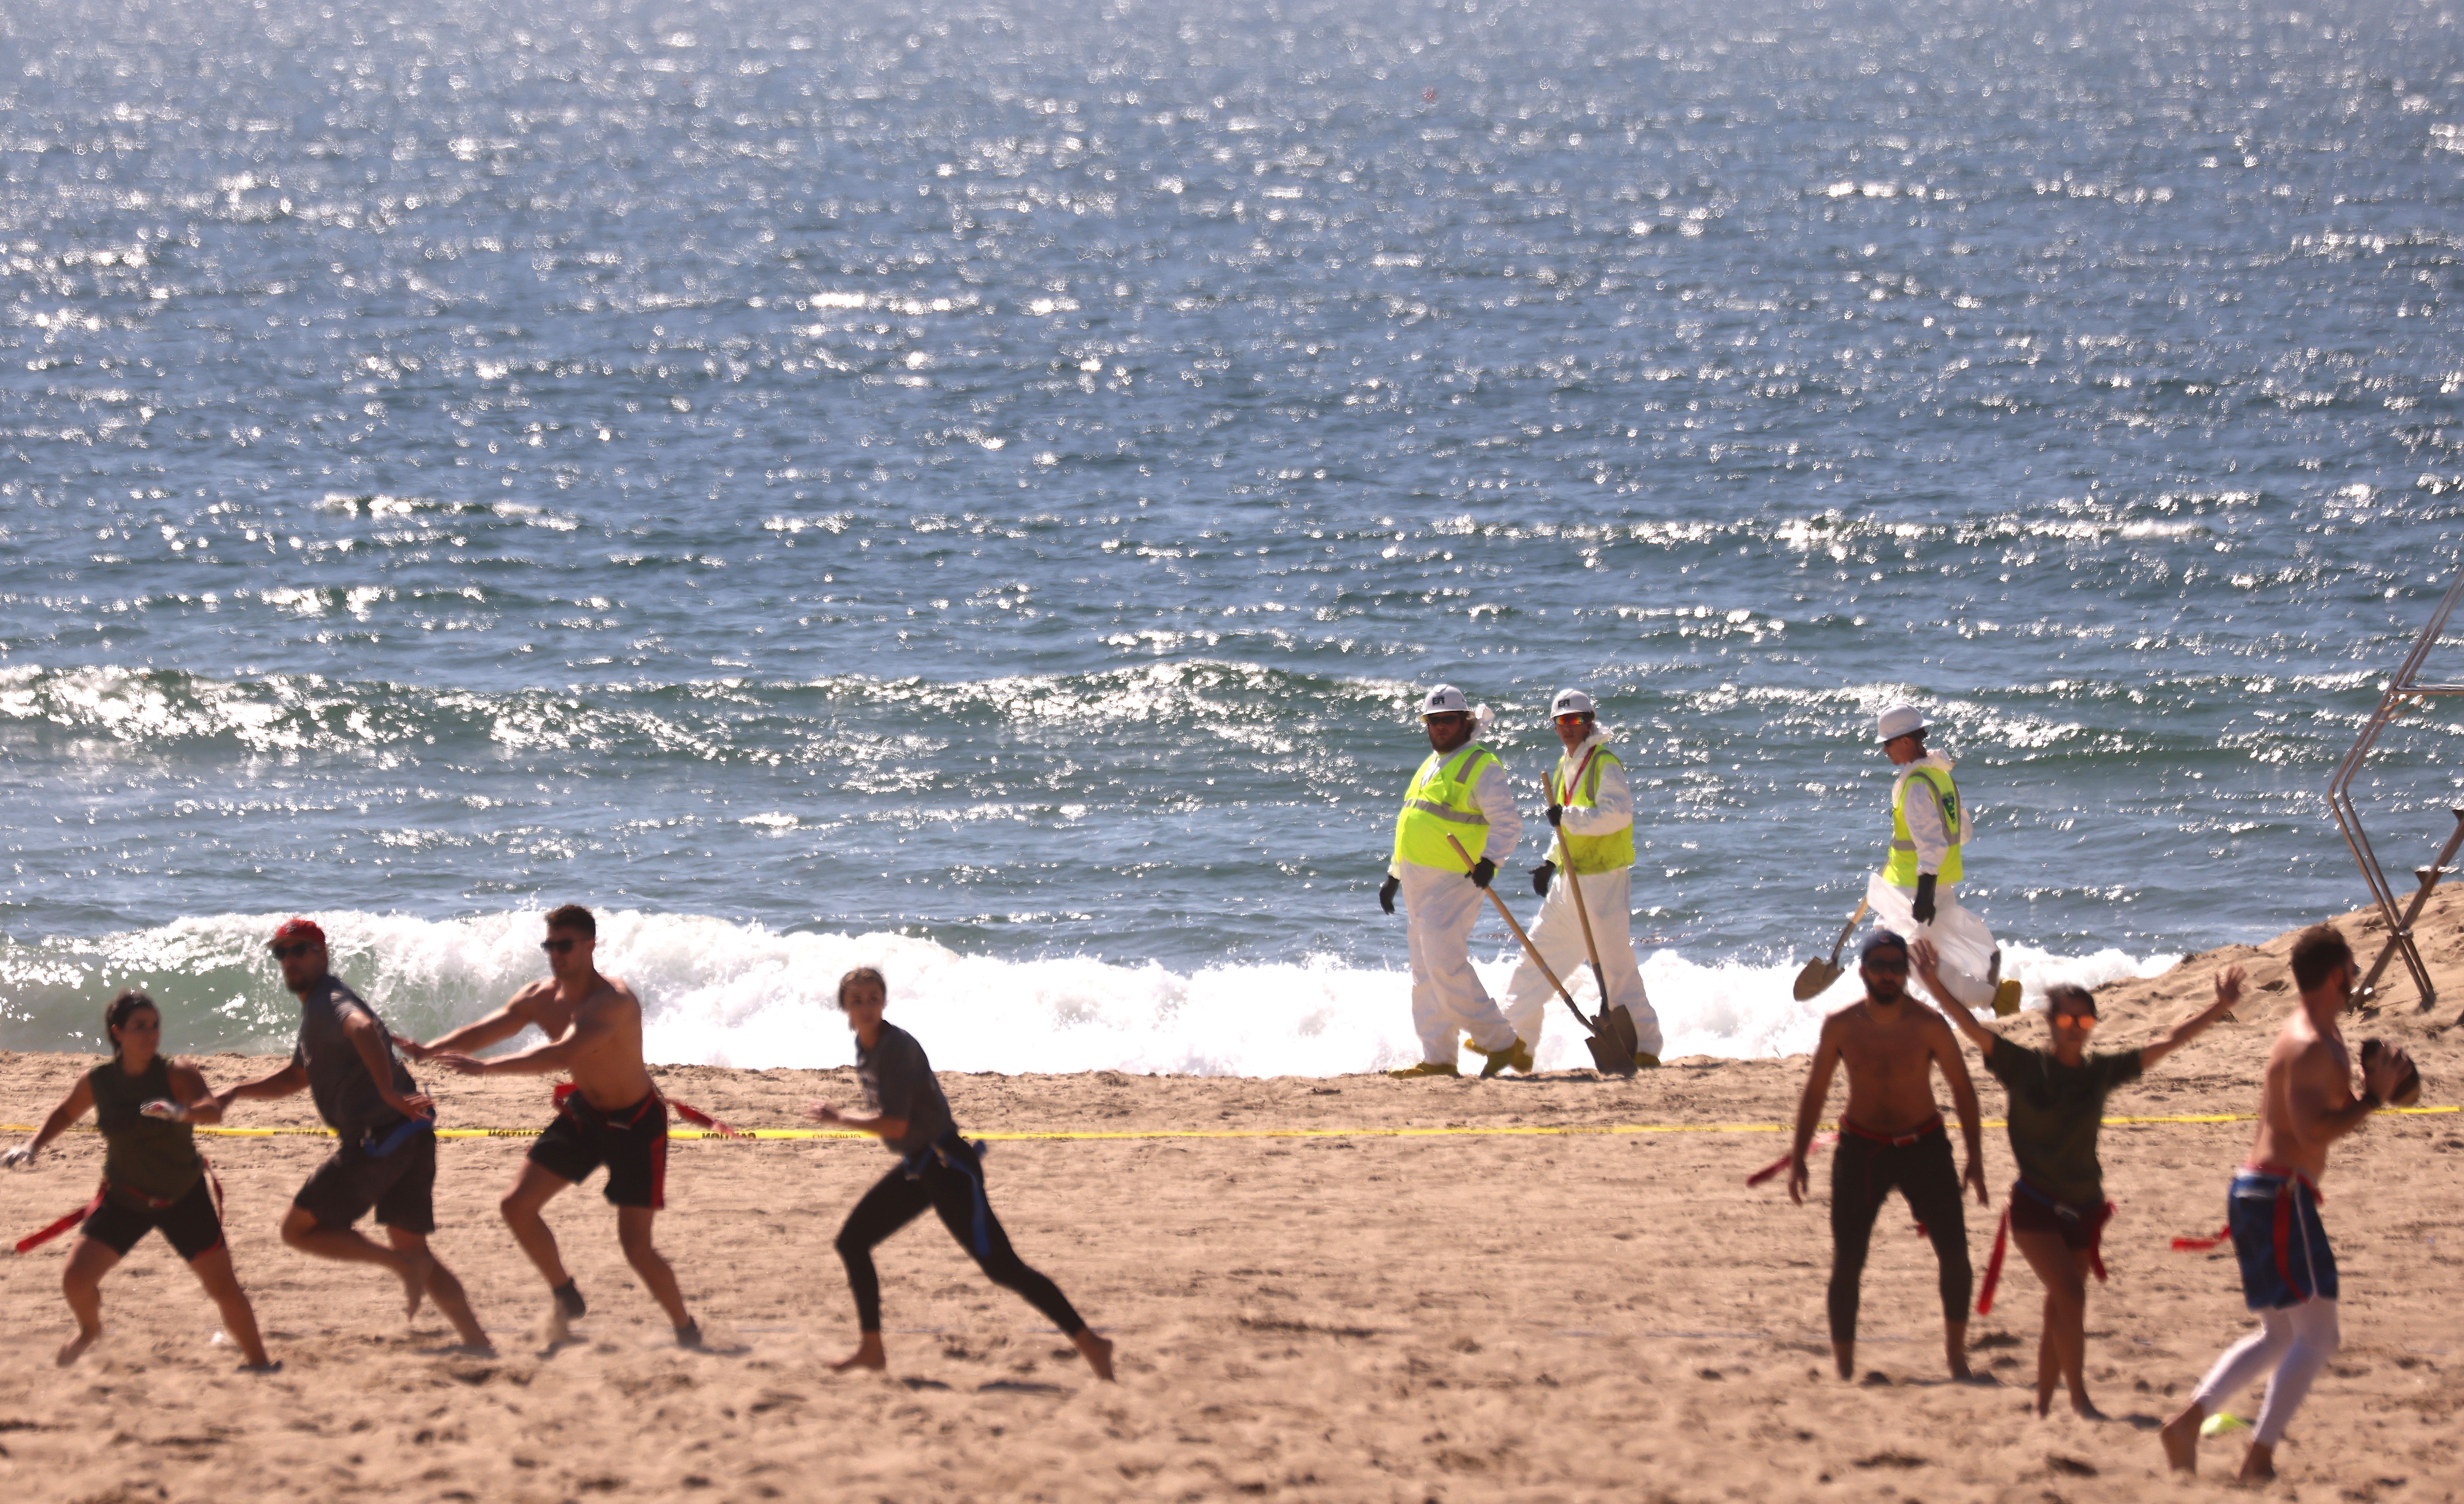  People play football as cleanup workers look for contaimination in Huntington Beach, California.  